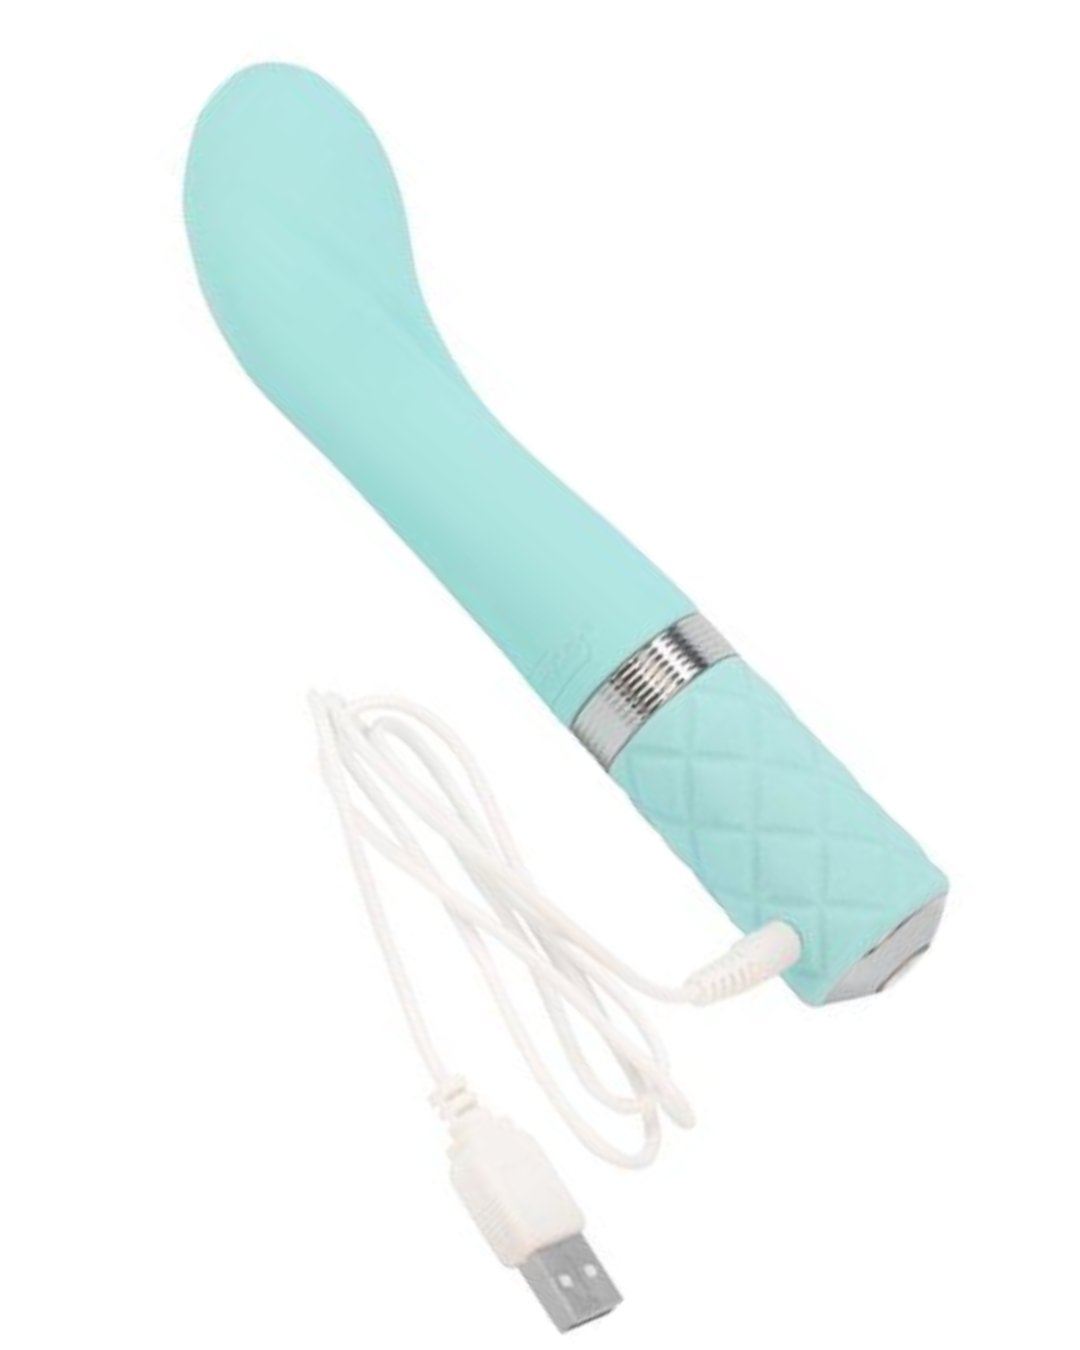 Pillow Talk Sassy G-spot Vibrator by BMS - Teal with charging cord